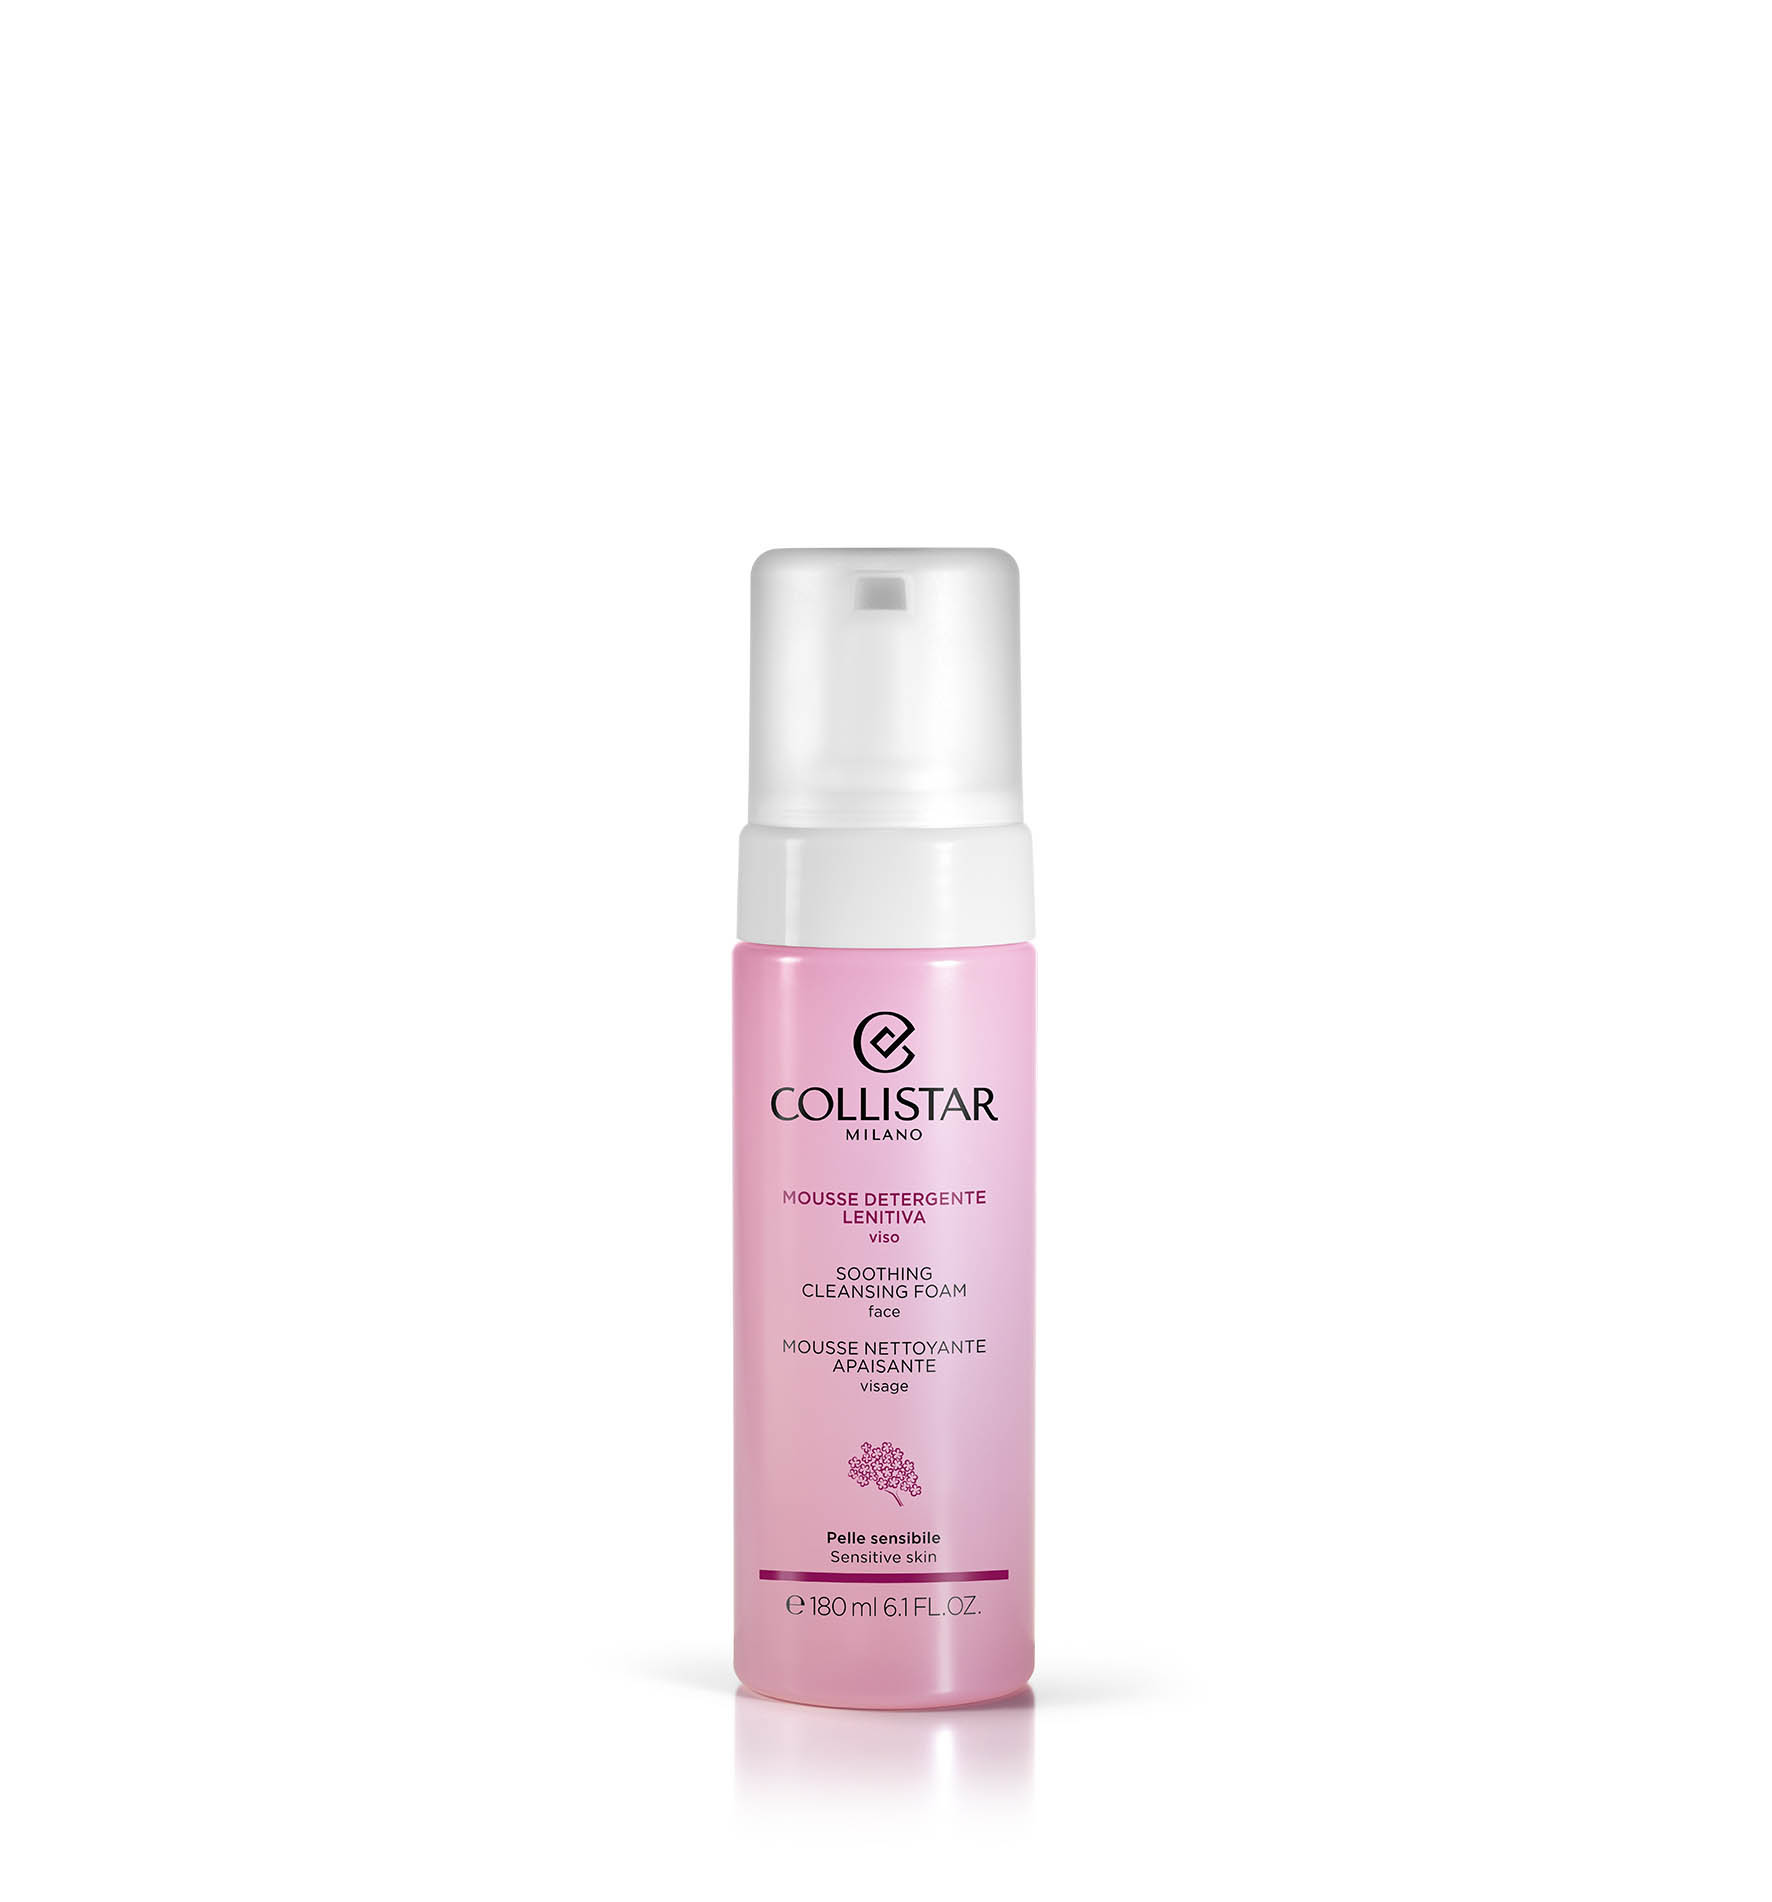 SOOTHING CLEANSING FOAM FACE - Combination and Oily Skin | Collistar - Shop Online Ufficiale